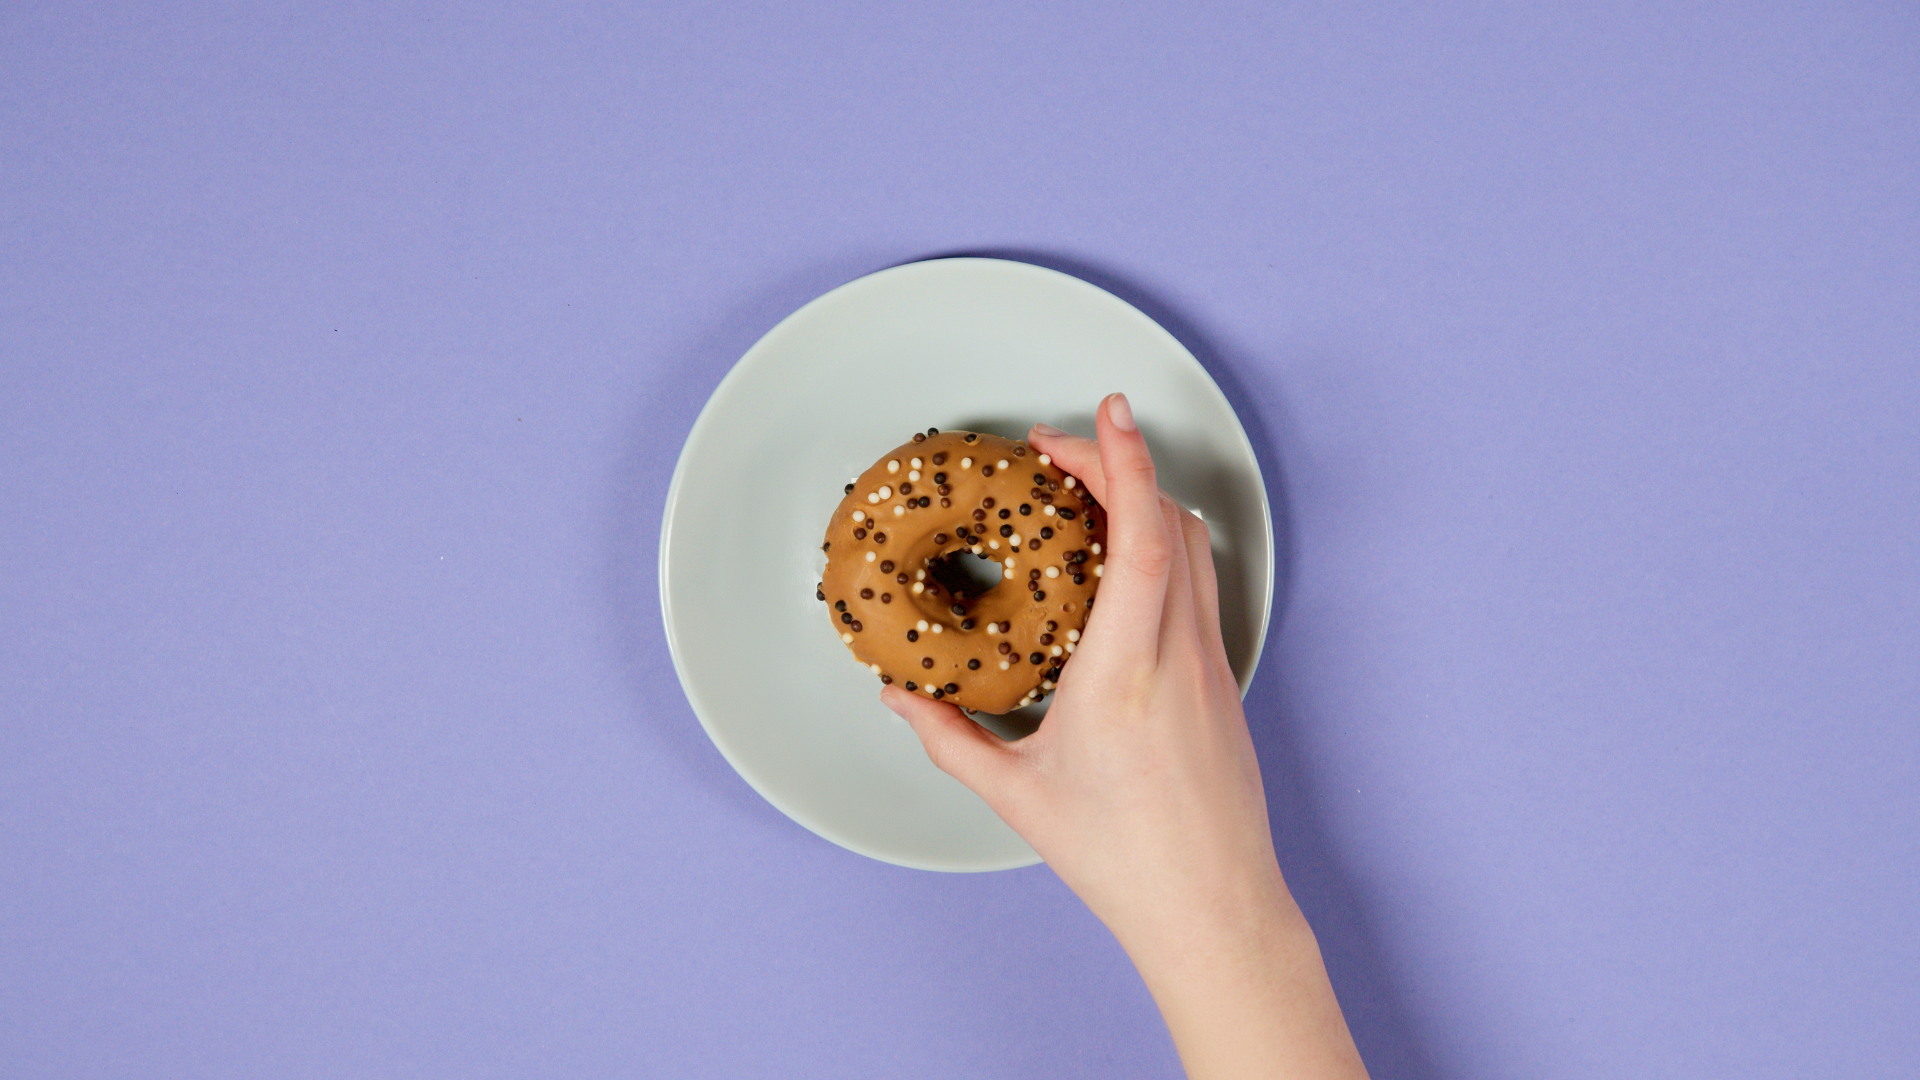 Hand reaching for a donut on a blue purple colored table linen